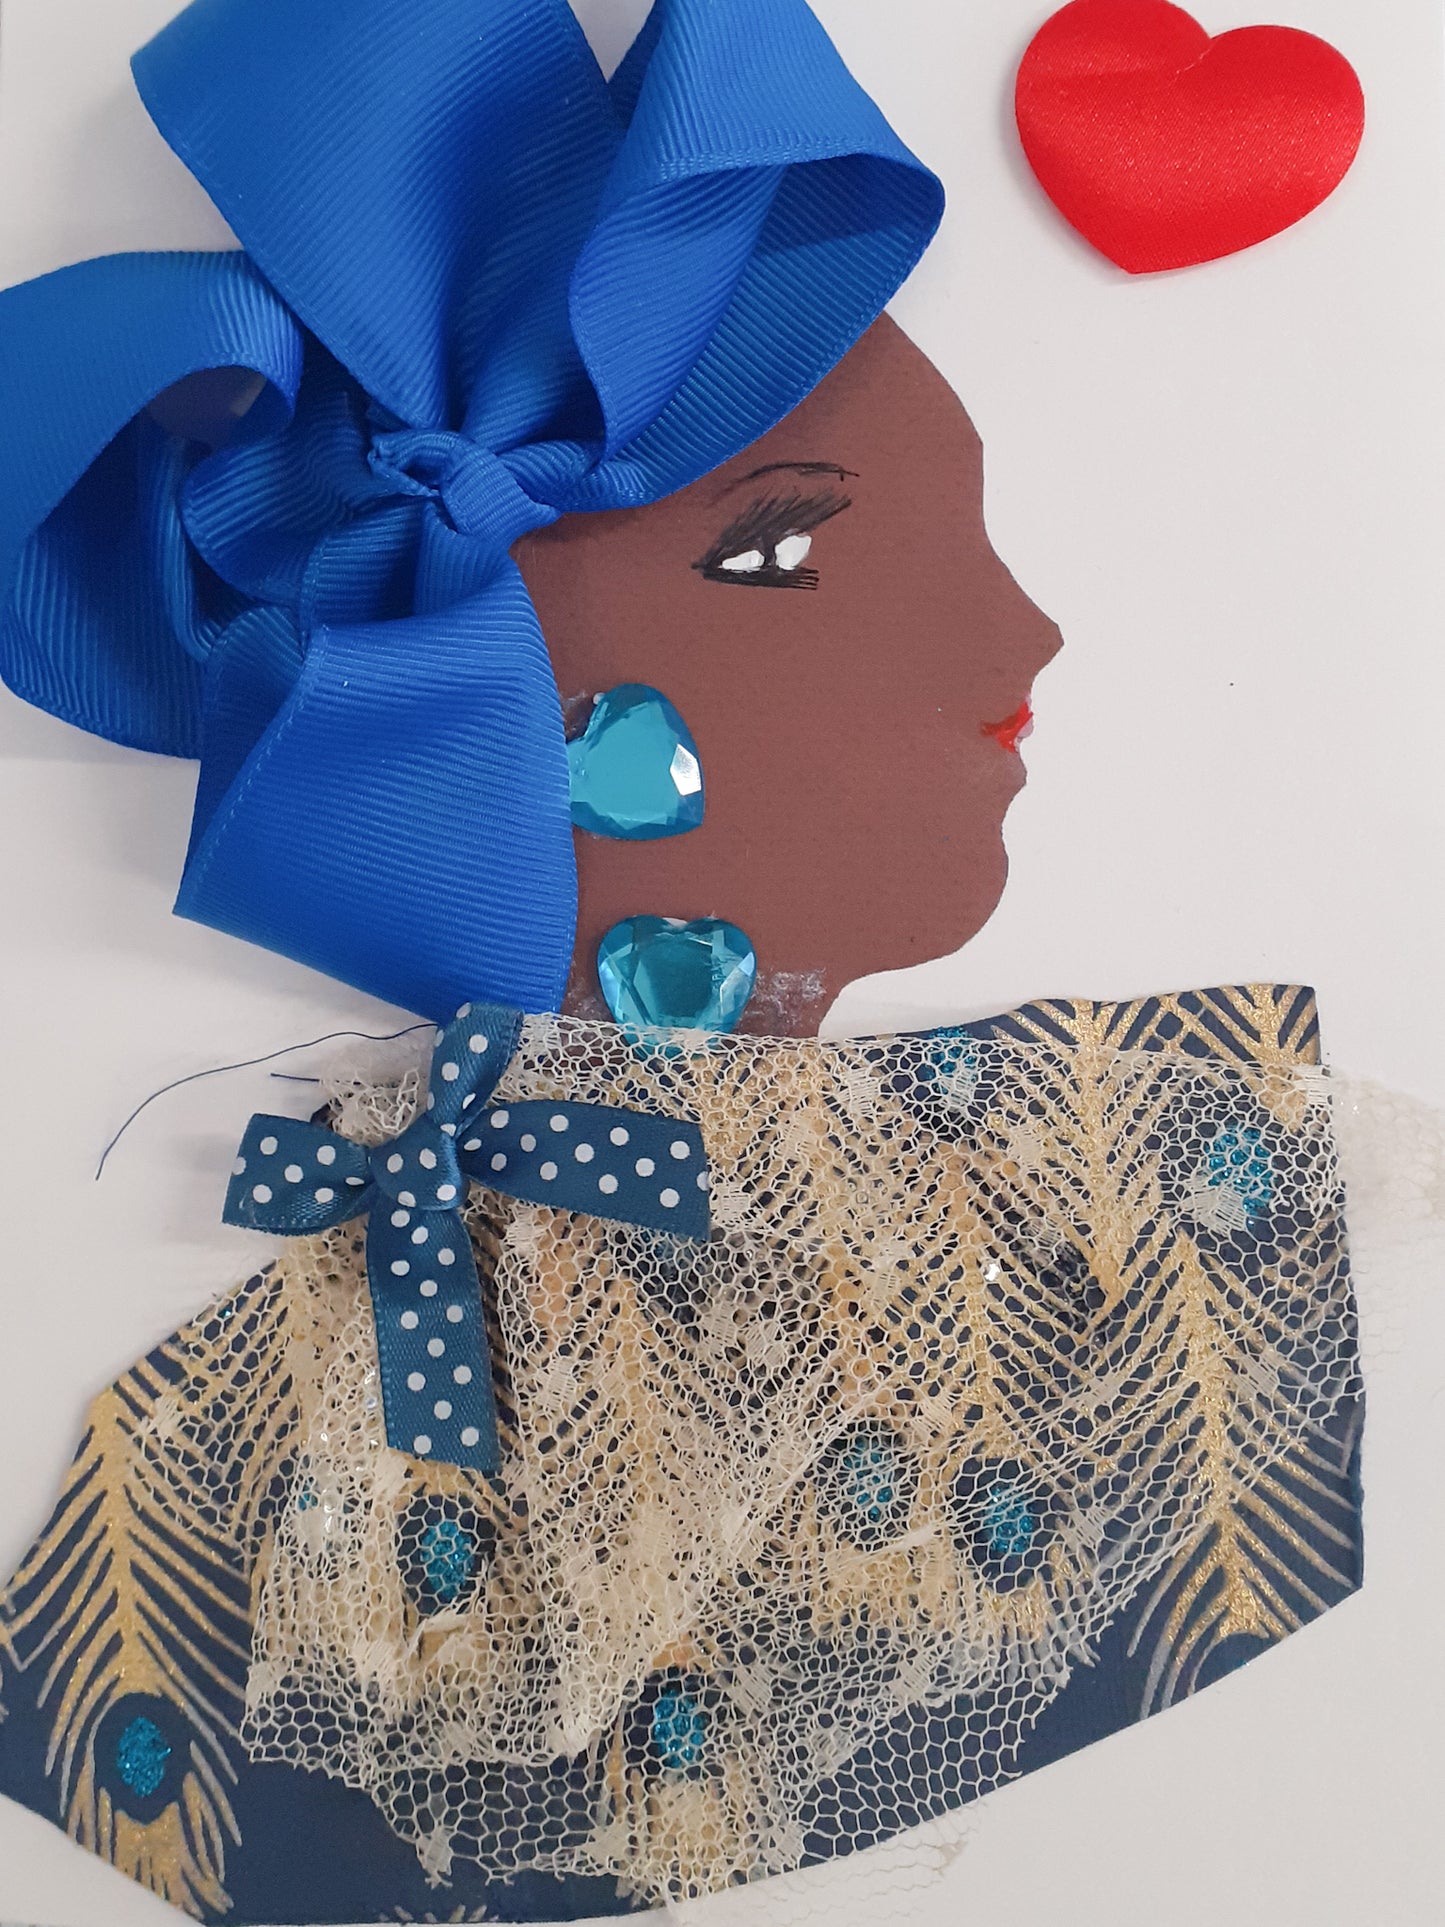 This card is given the name Colindale. Colindale wears a blue fabric which has gold peacock feather prints on it. She wears a large blue bow on her head, and has blue heart earrings and a matching necklace. There is a red heart in the top right corner of the card. 